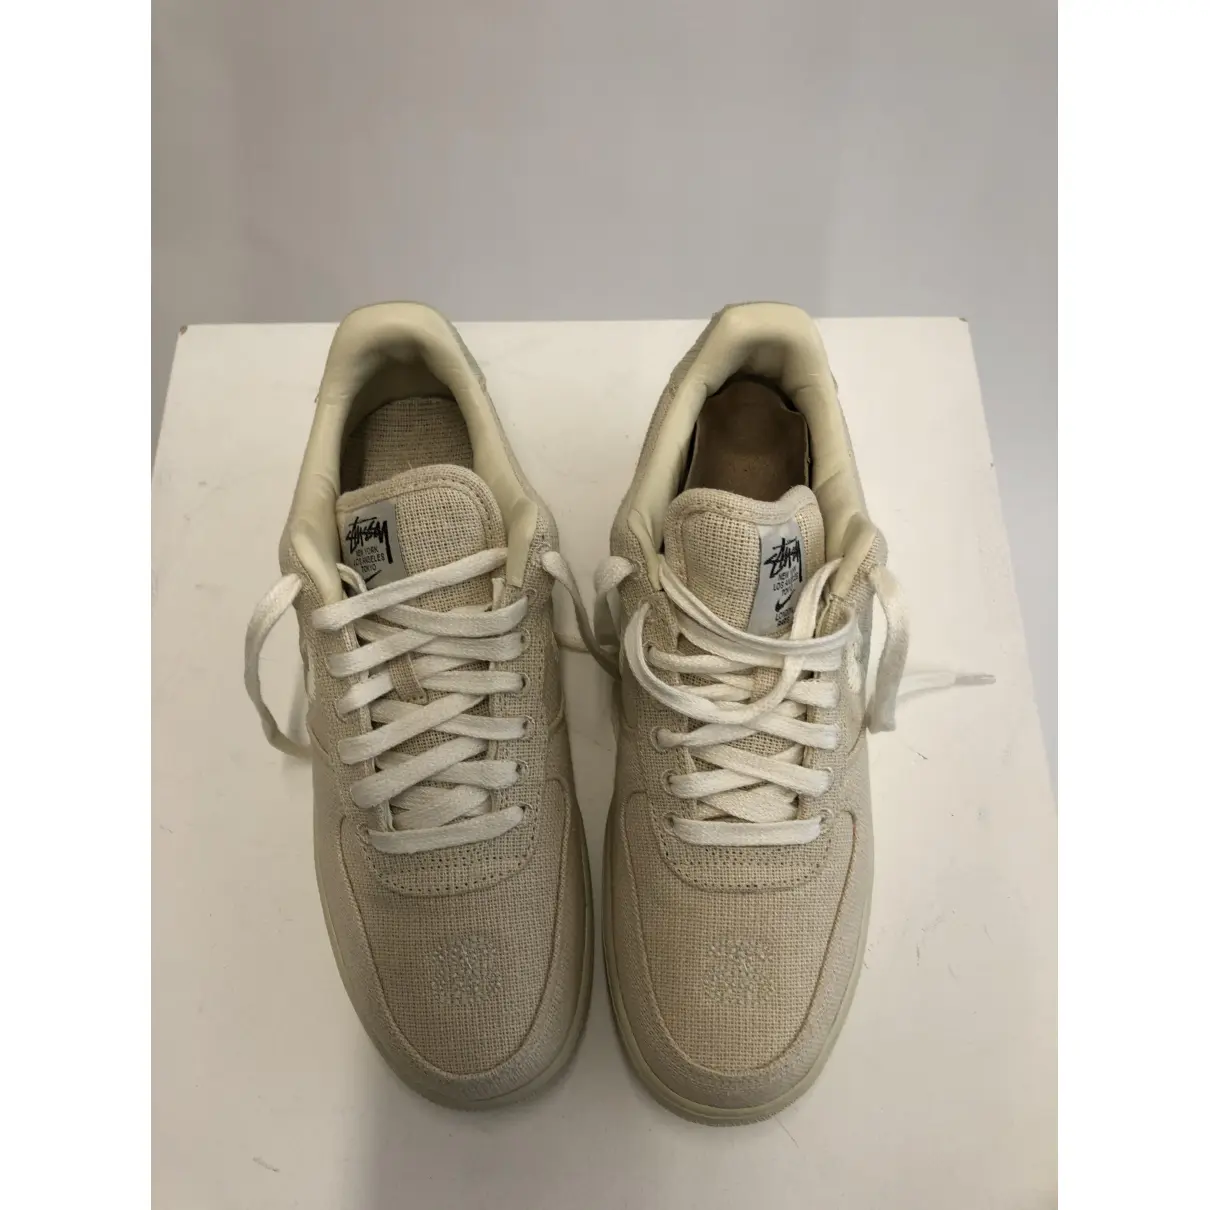 Buy Nike x Stussy Air Force 1 cloth trainers online